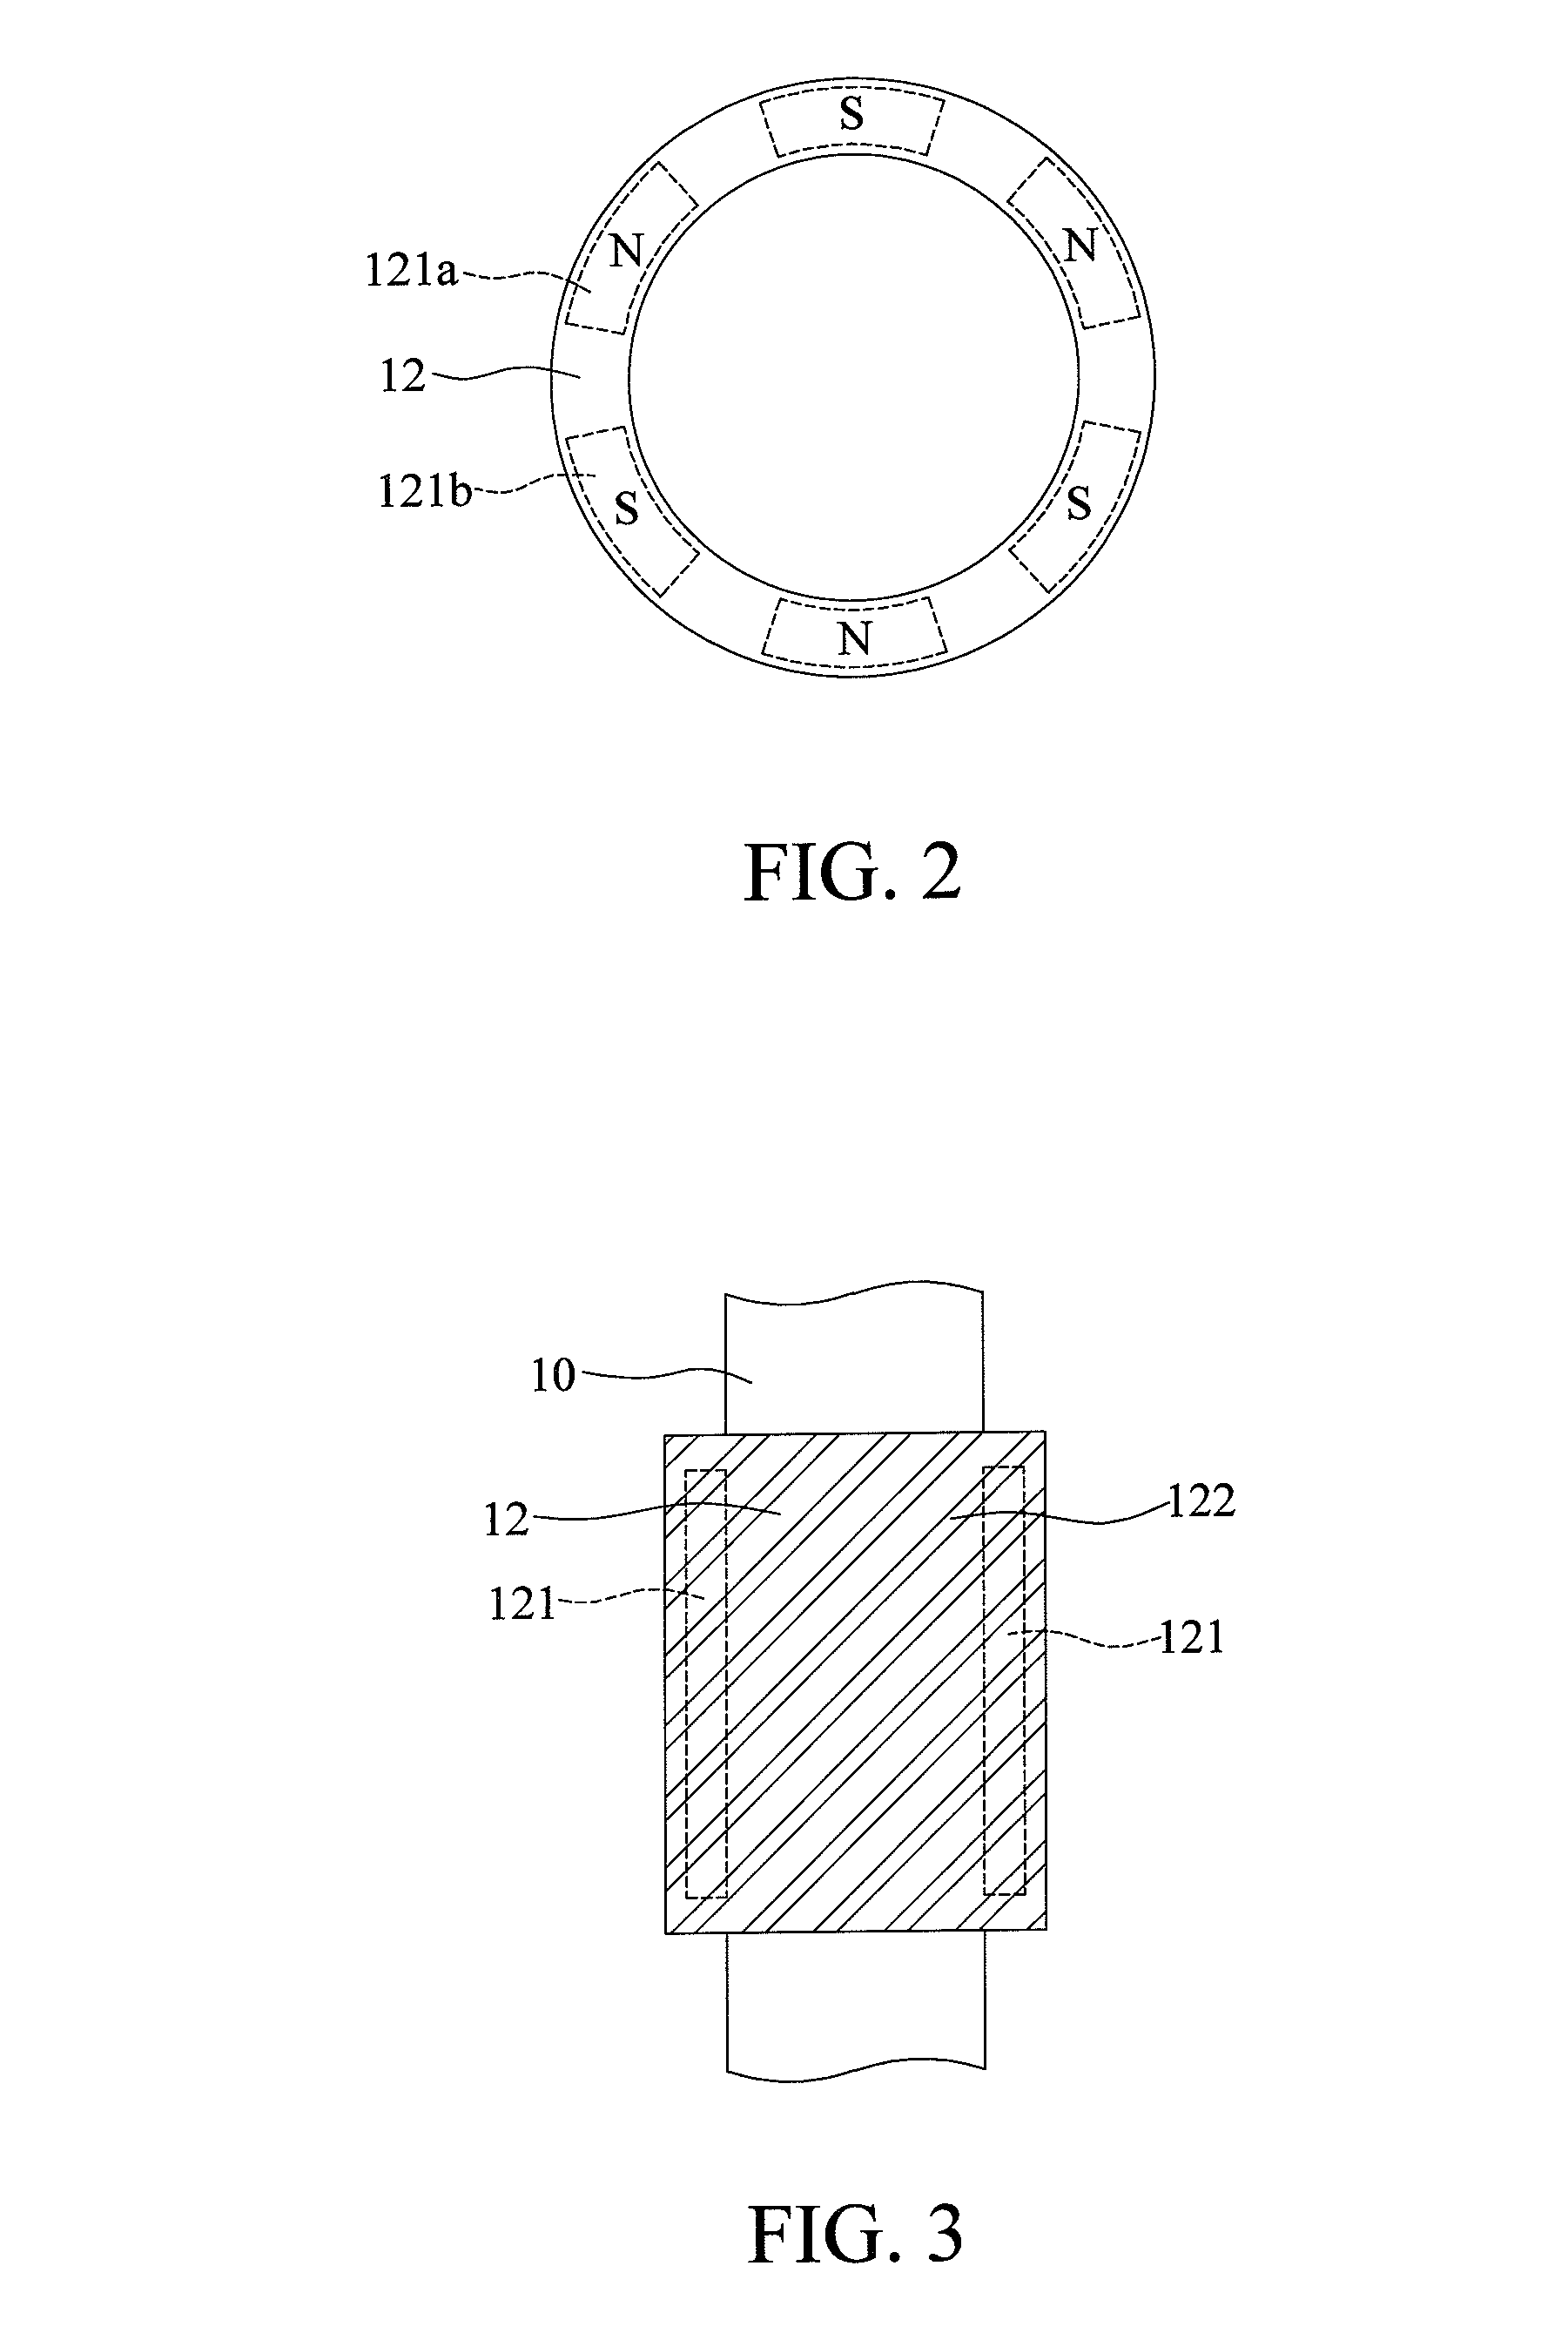 Magnetic-controlled system applicable for colonoscopy